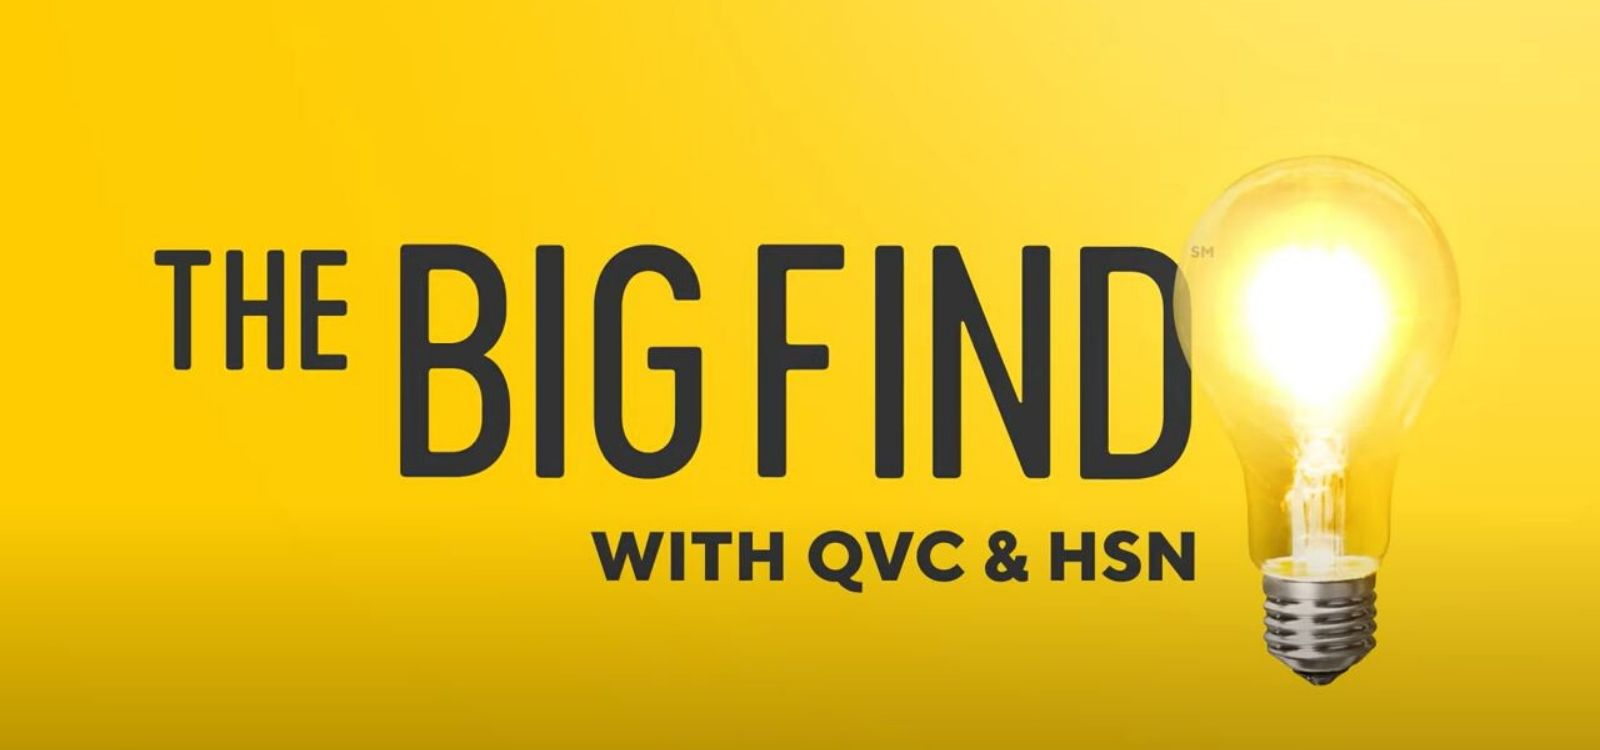 Mented is The Big Find with QVC & HSN!